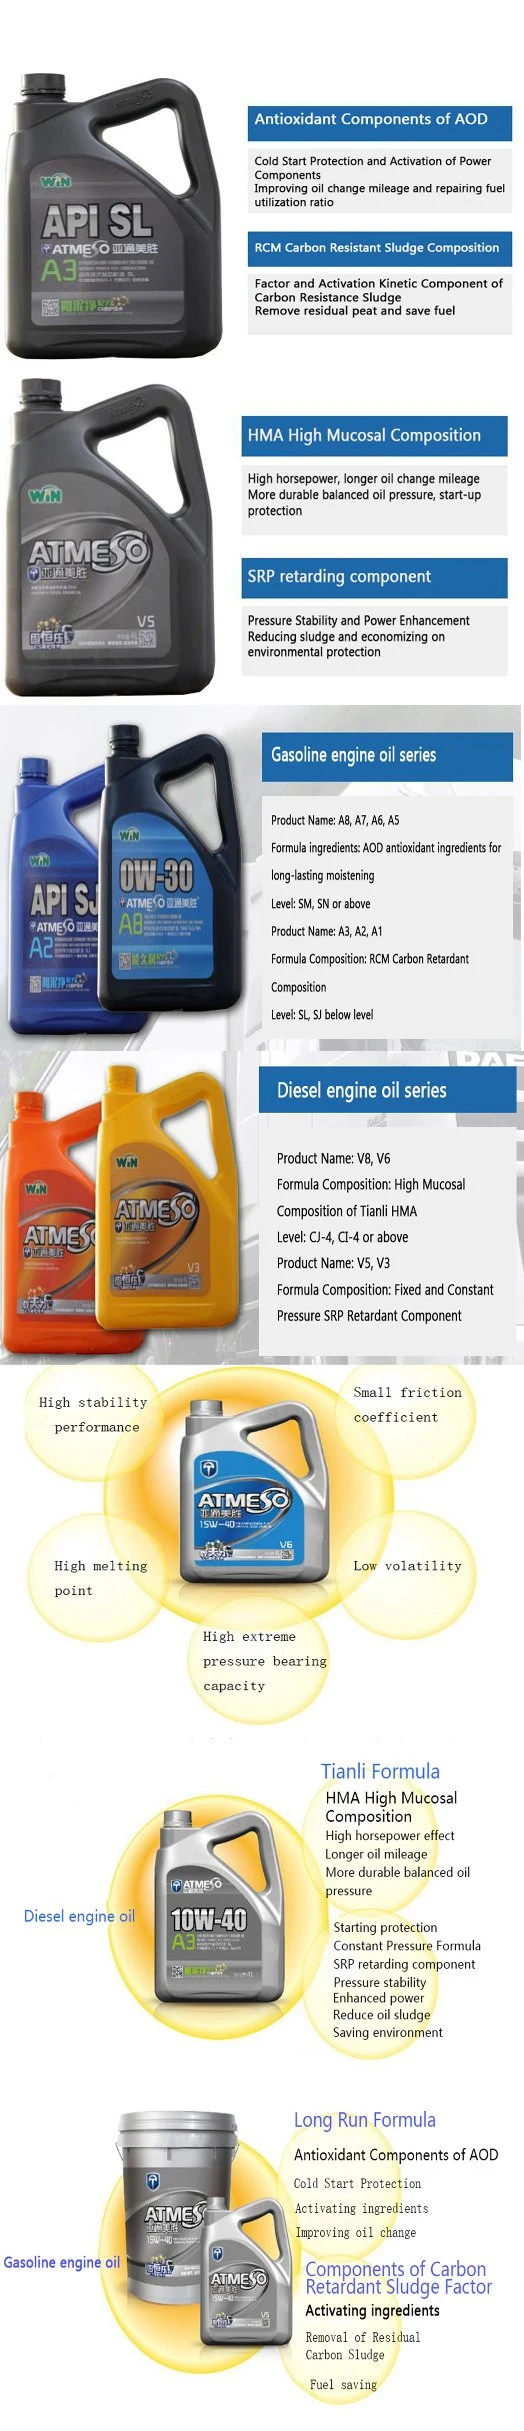 API Sj A2 Synthetic Engine Lubricants Dky067